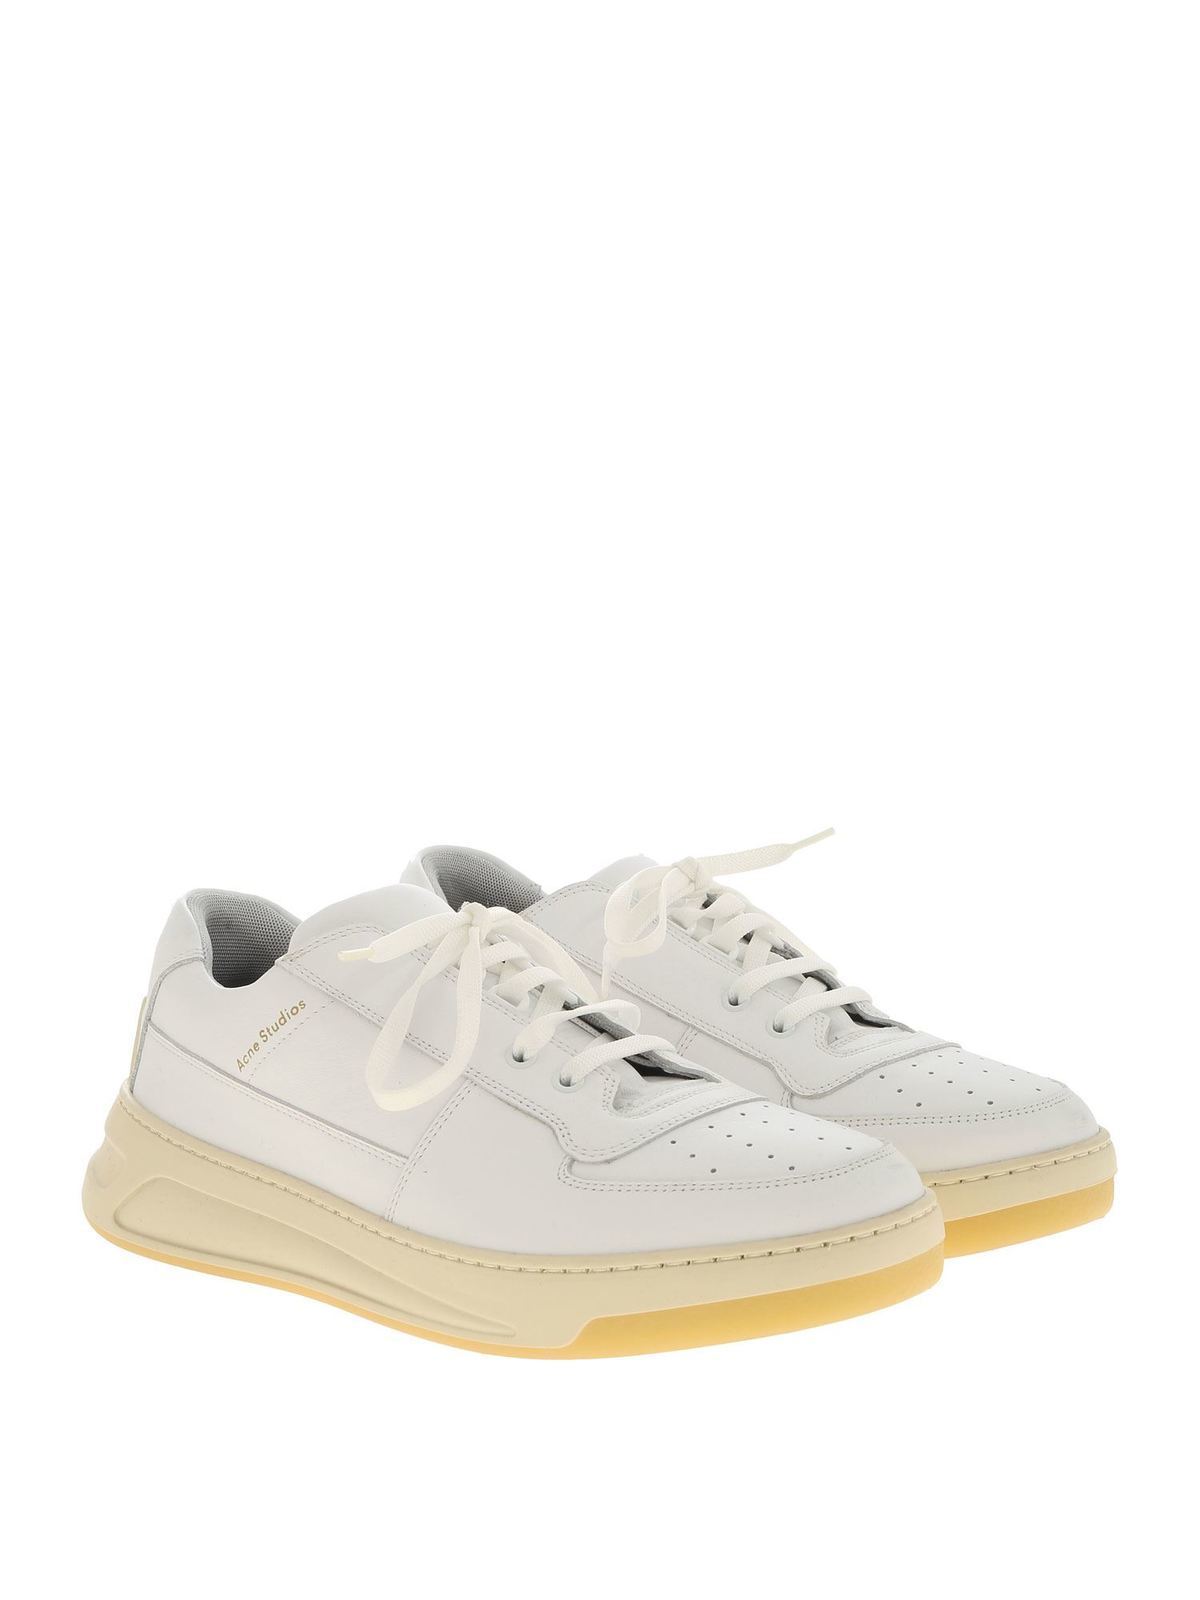 Trainers Acne Studios - sneakers in white - BD0011WHITE